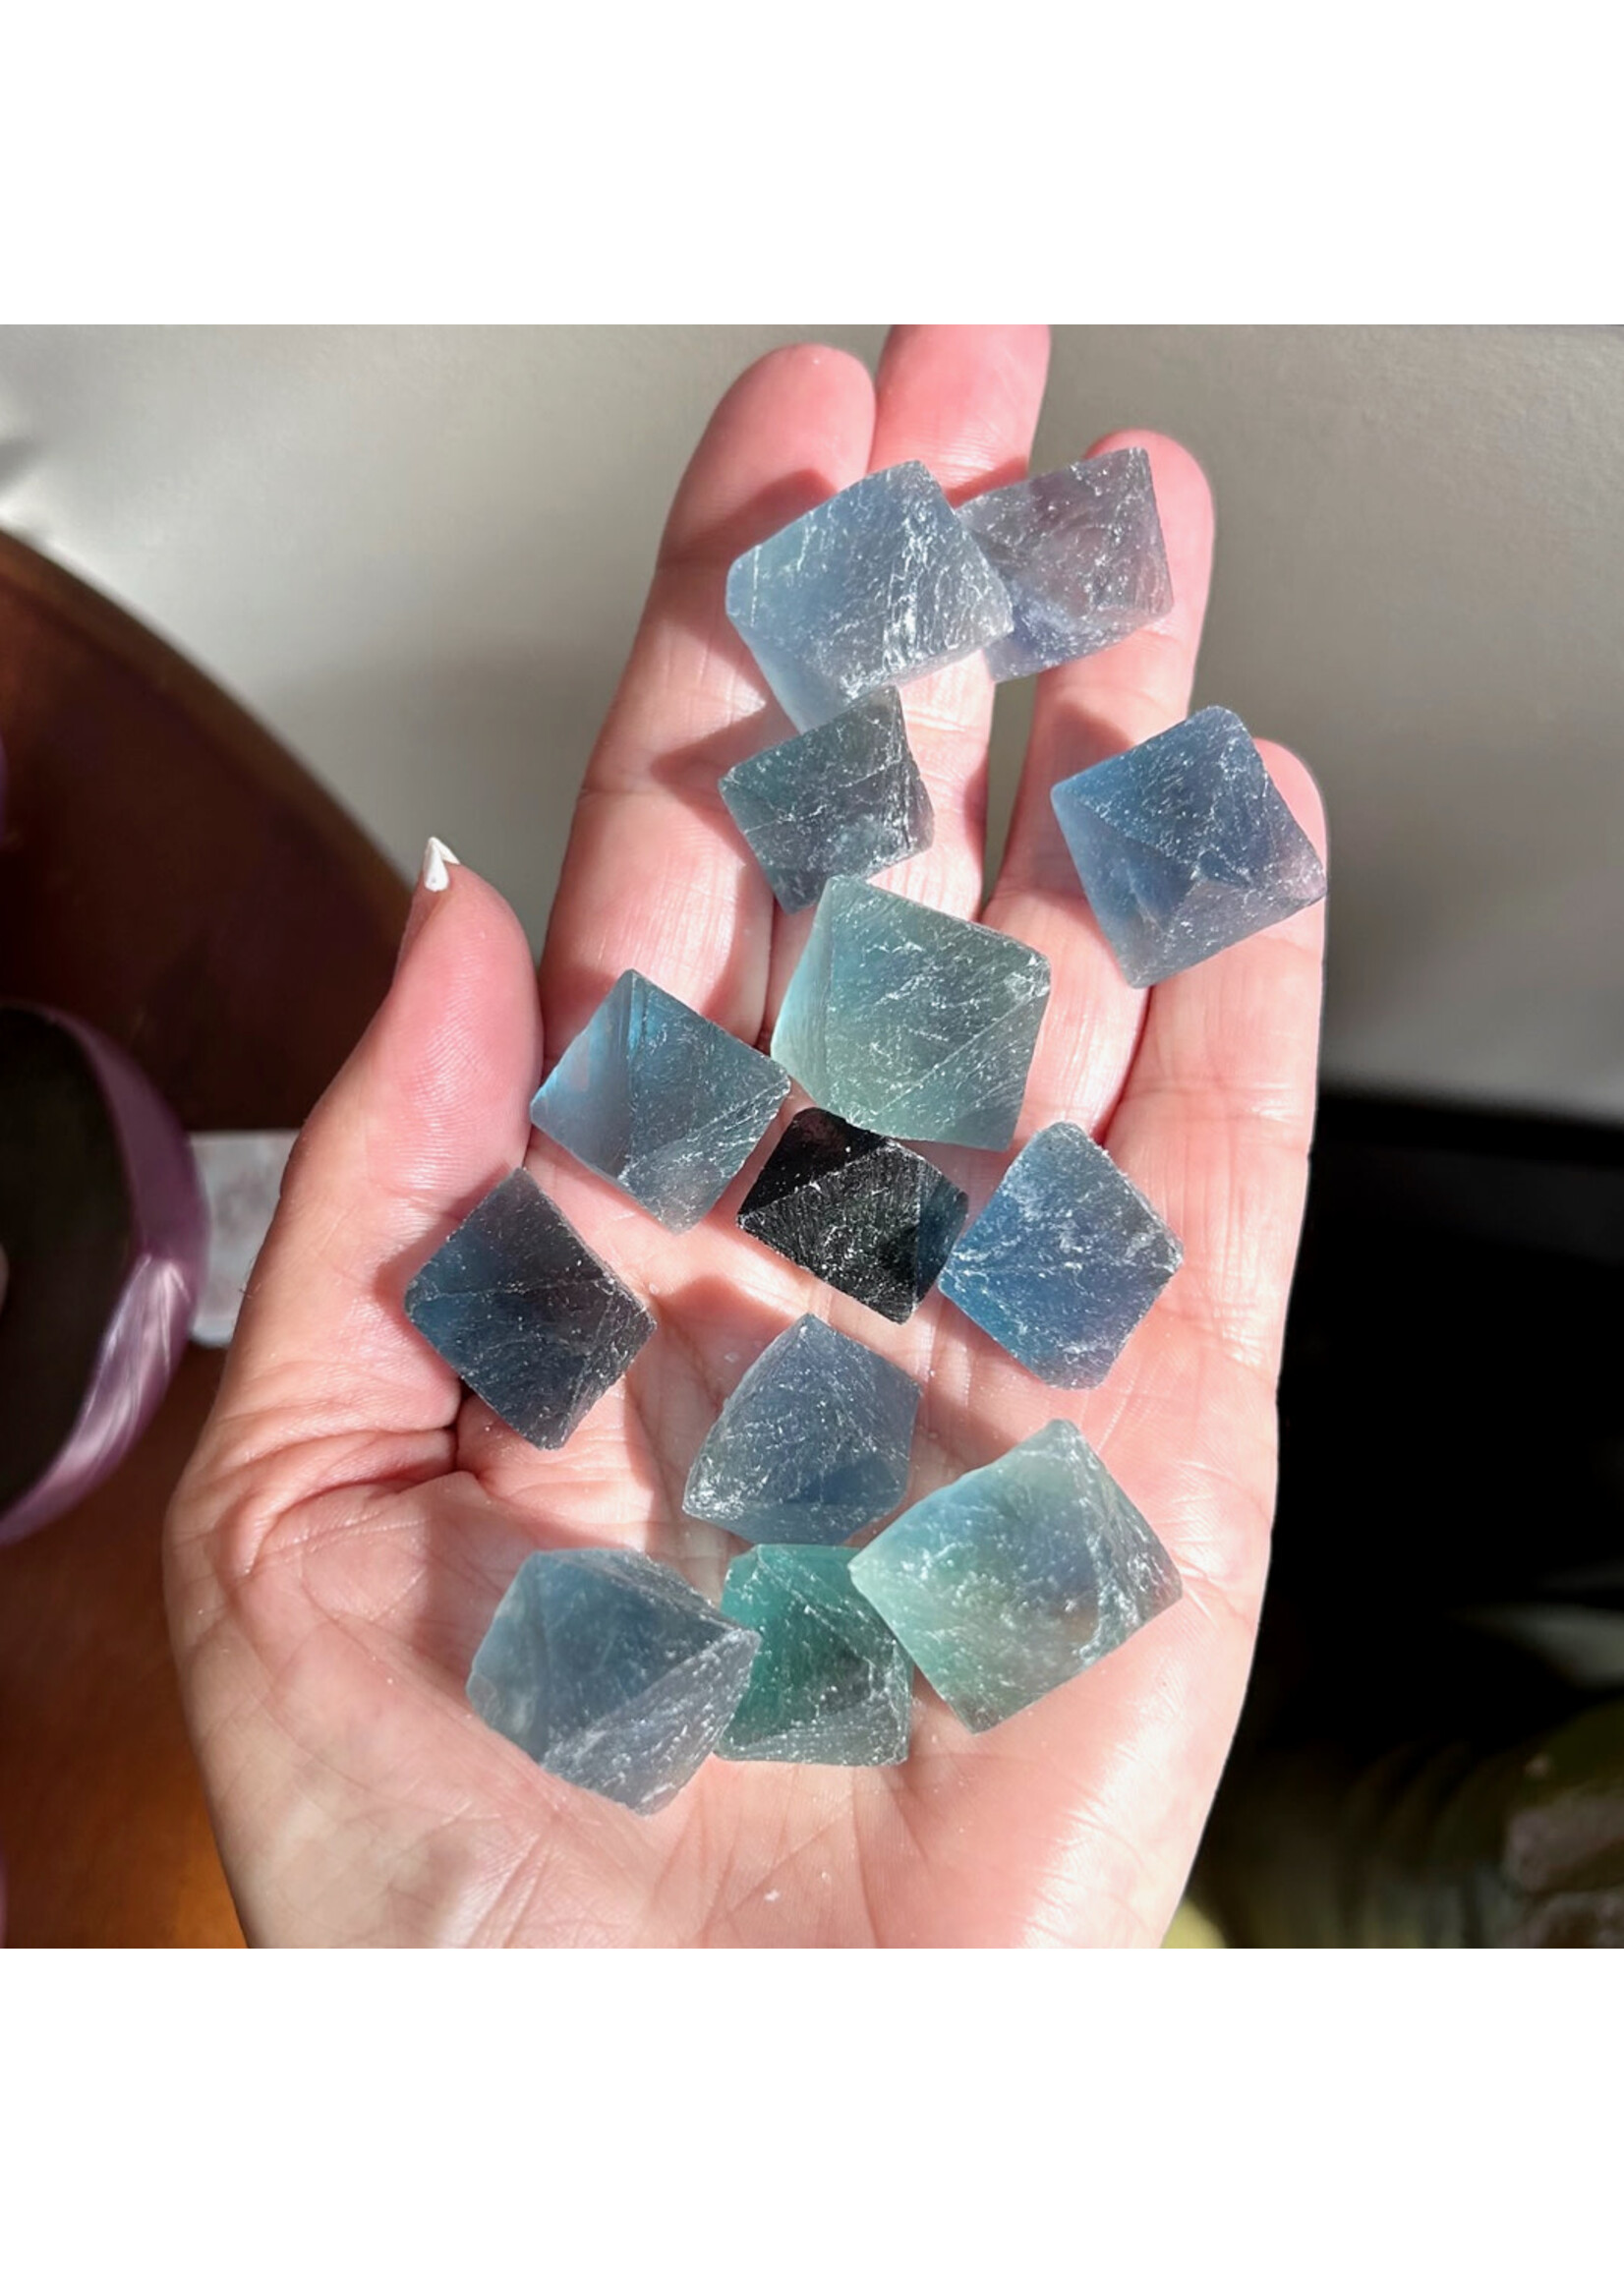 Blue Fluorite Octahedrons for guiding your soul's purpose